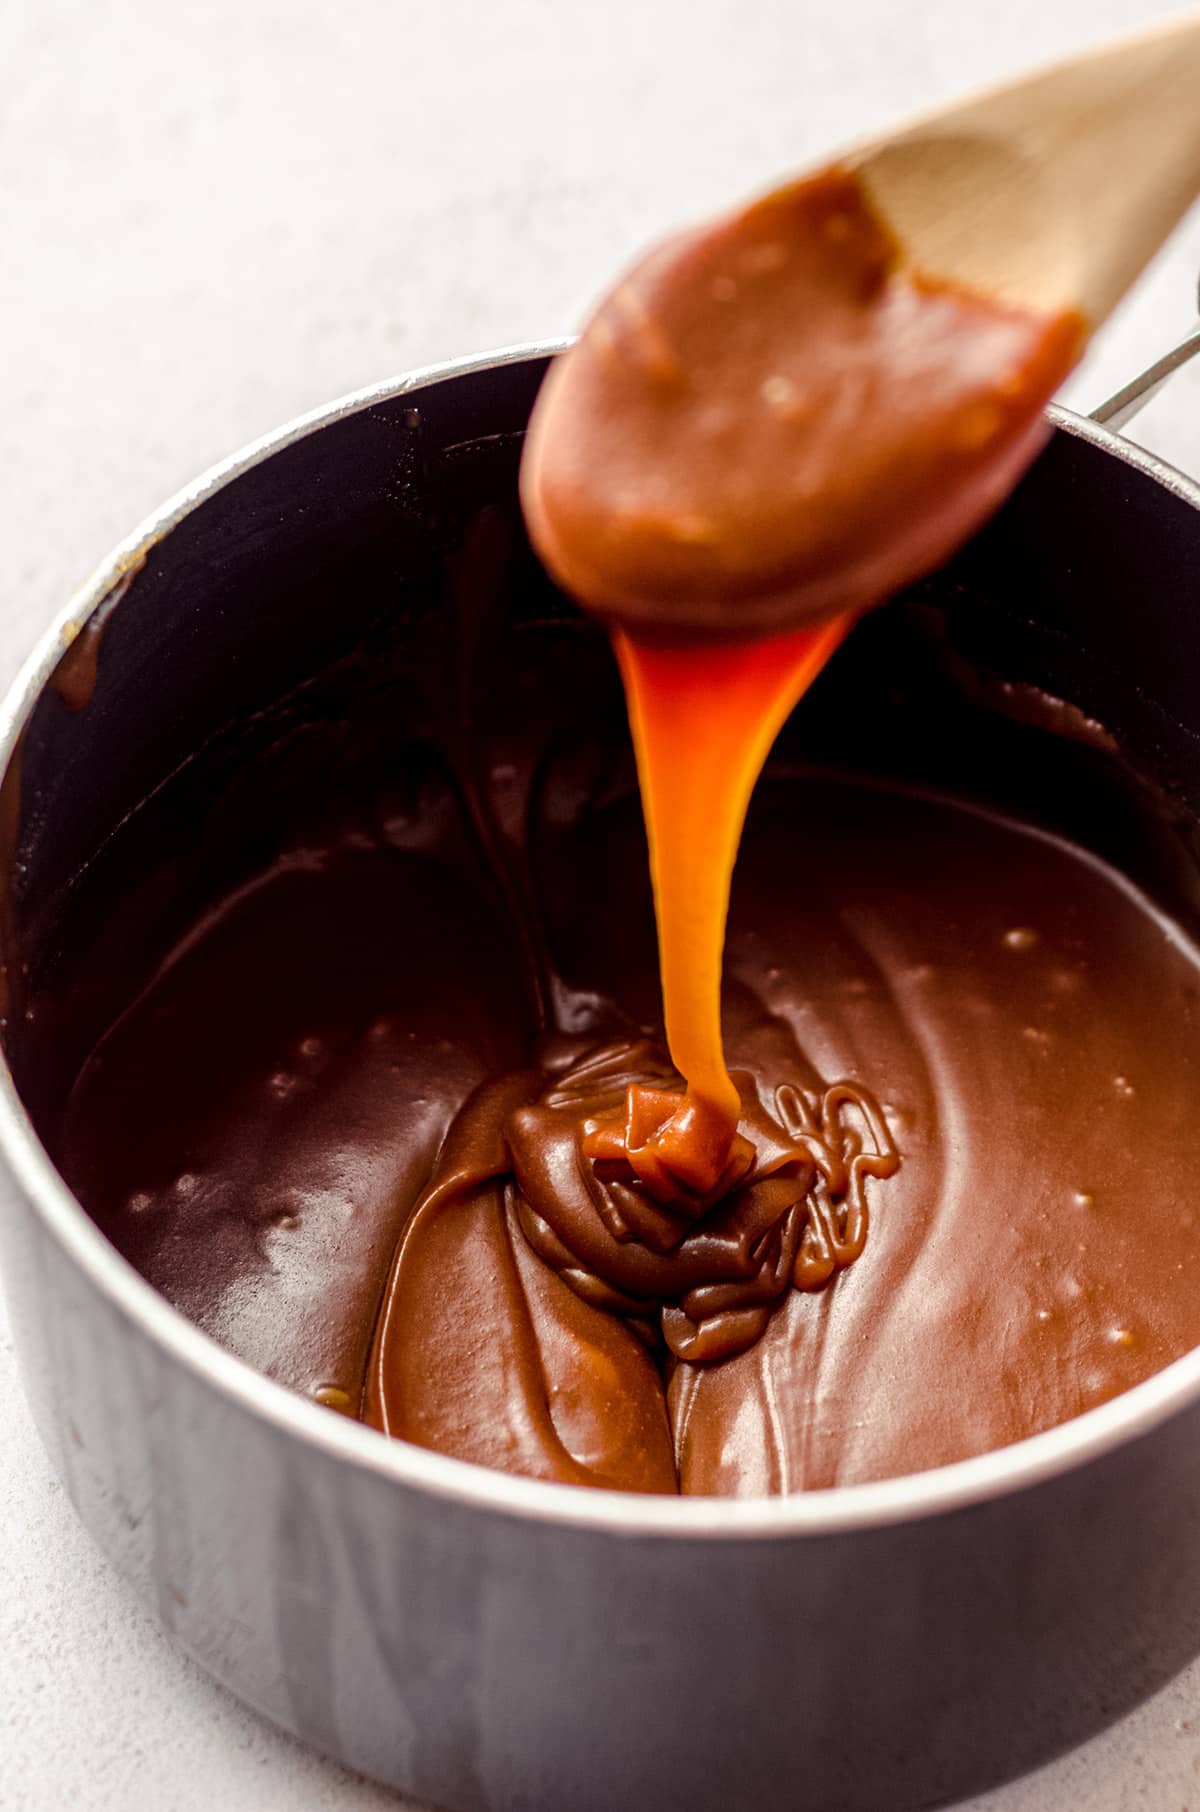 wooden spoon dipped into a saucepan of salted caramel sauce and dripping it back into the pan